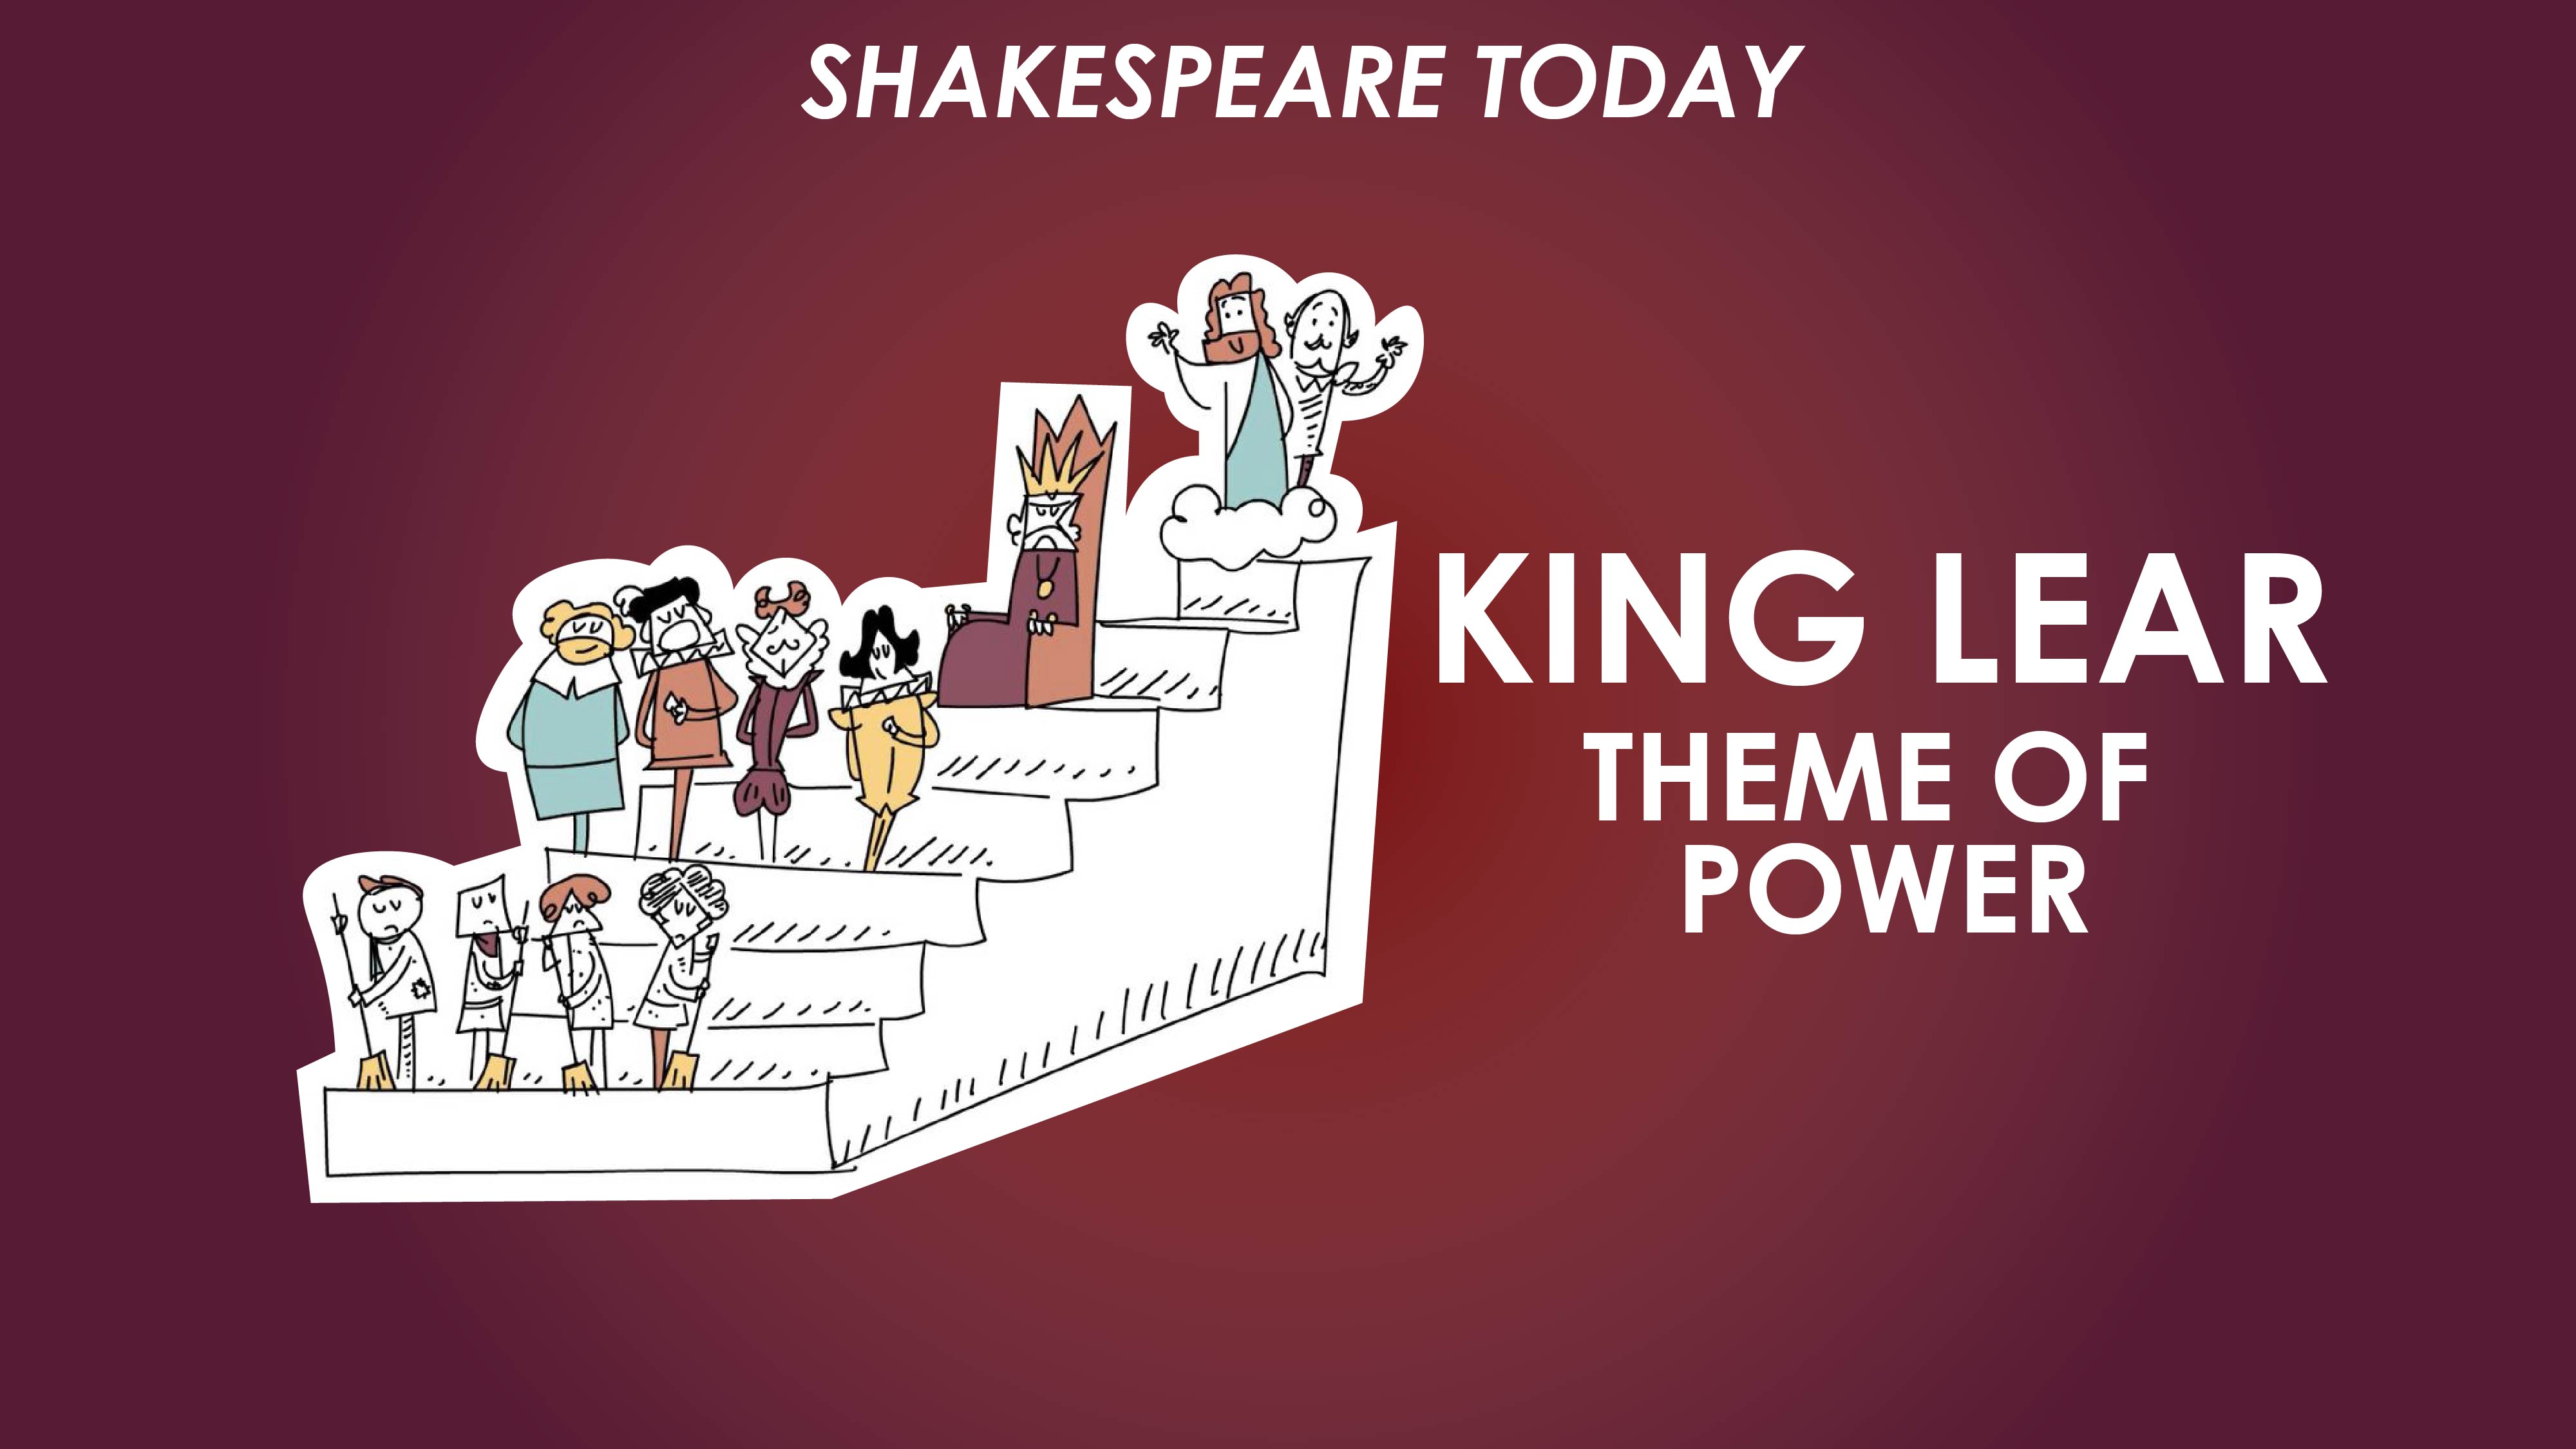 king-lear-act-1-summary-shakespeare-today-series